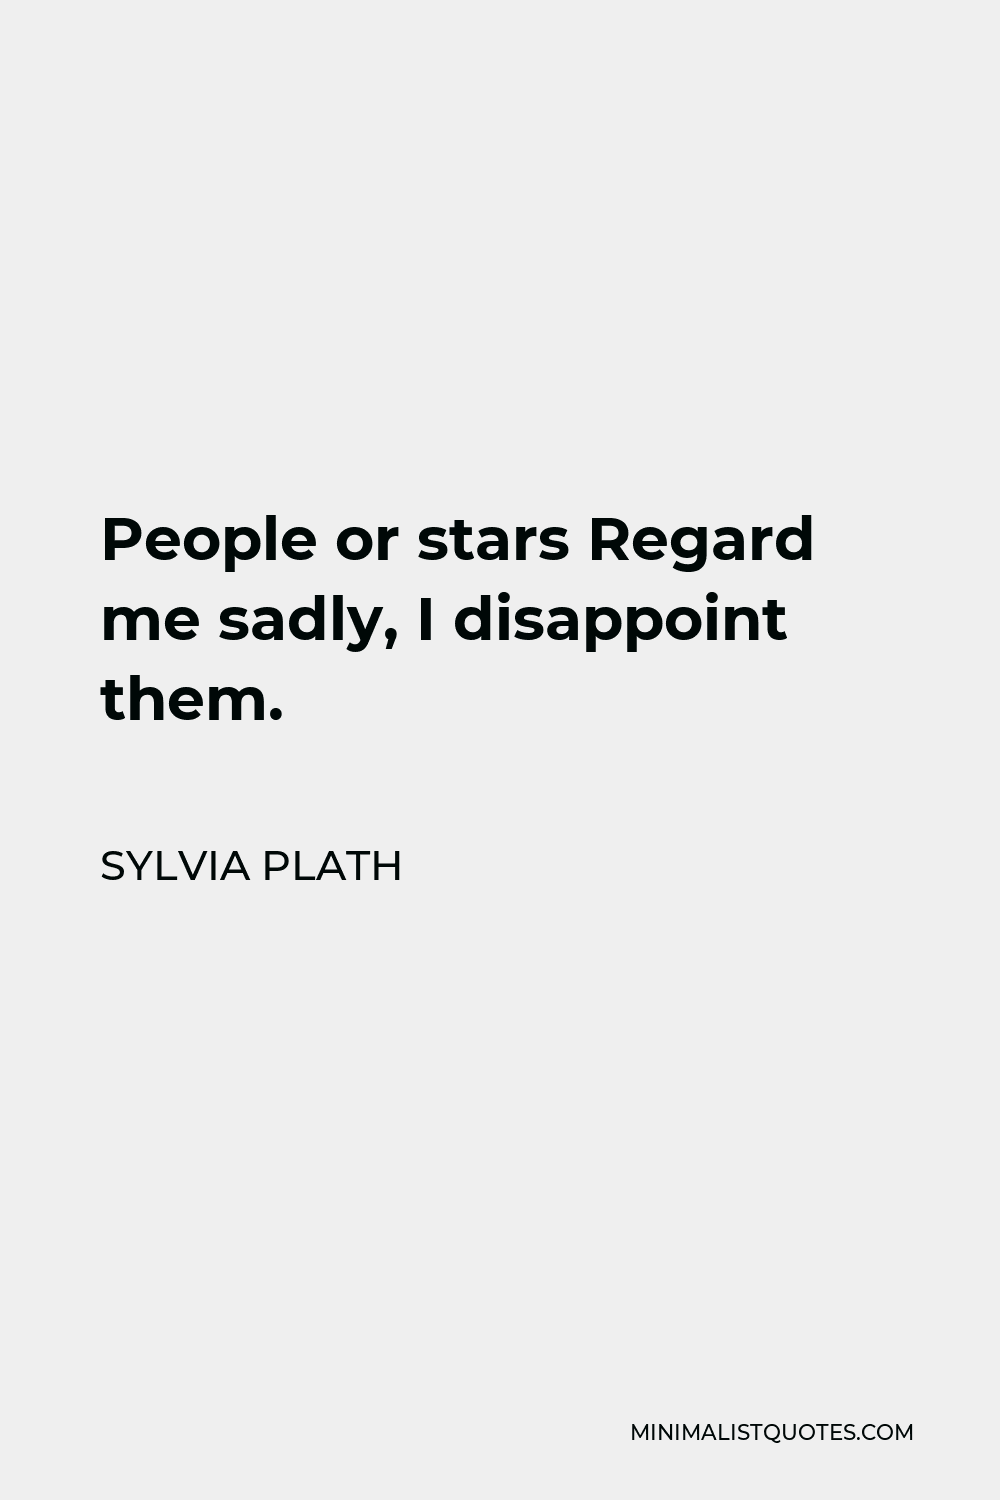 Sylvia Plath Quote - People or stars Regard me sadly, I disappoint them.